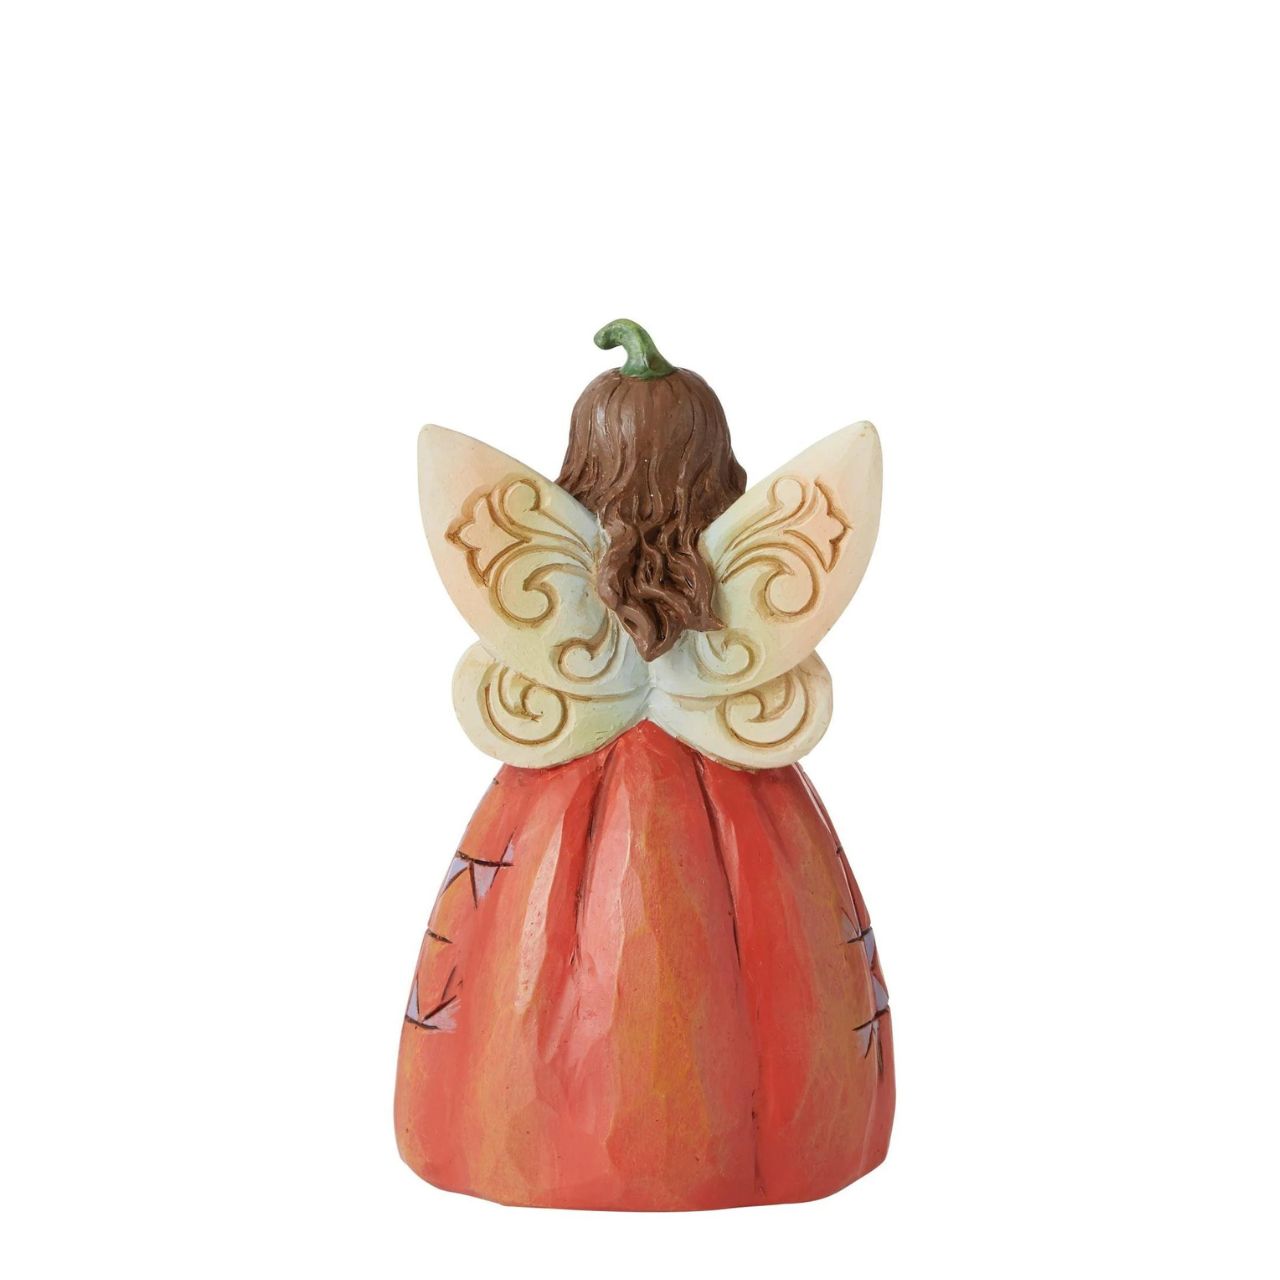 Heartwood Creek Pumpkin Fairy Figurine  Handcrafted in breath-taking detail, this beautiful Pumpkin Fairy Mini Figurine is beautifully decorated in Jim Shore's subtle combination of traditional quilt. Hands clasped delicately, the pumpkin fairy smiles softly, wings spread wide.